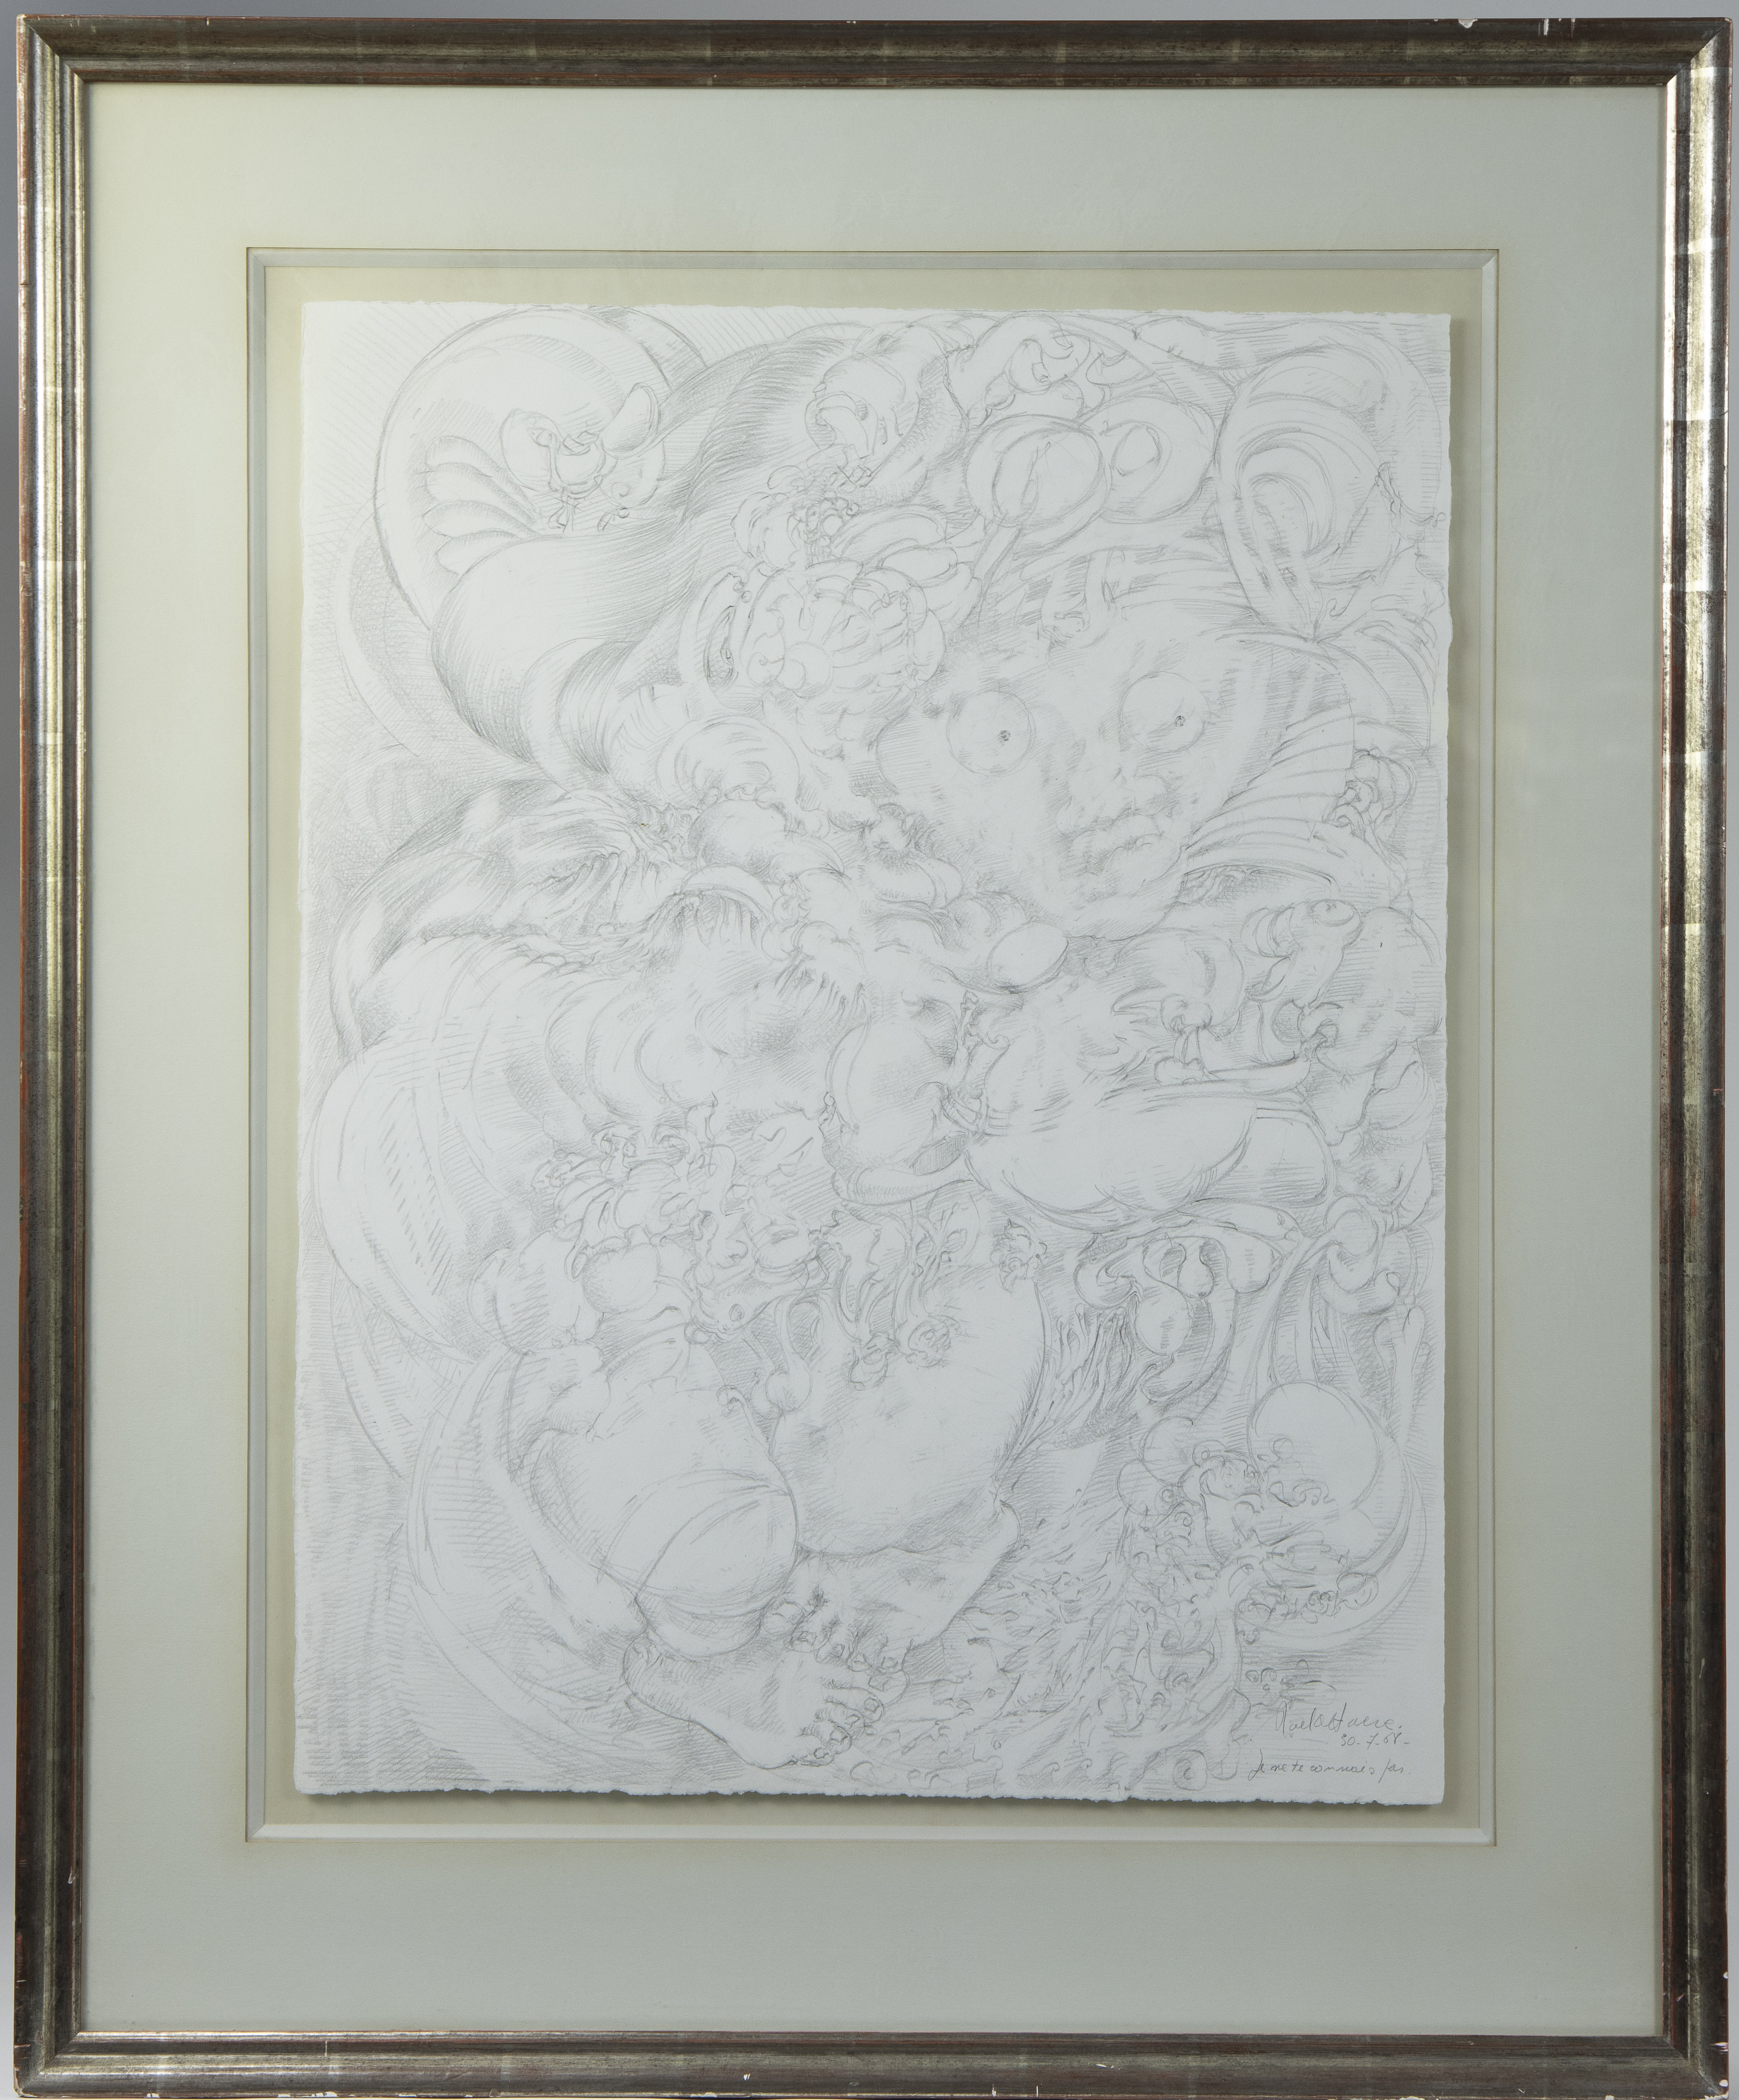 Roel D'HAESE (1921-1996), pencil drawing Je na connais pas, signed and dated 30/7/'68 - Image 2 of 3